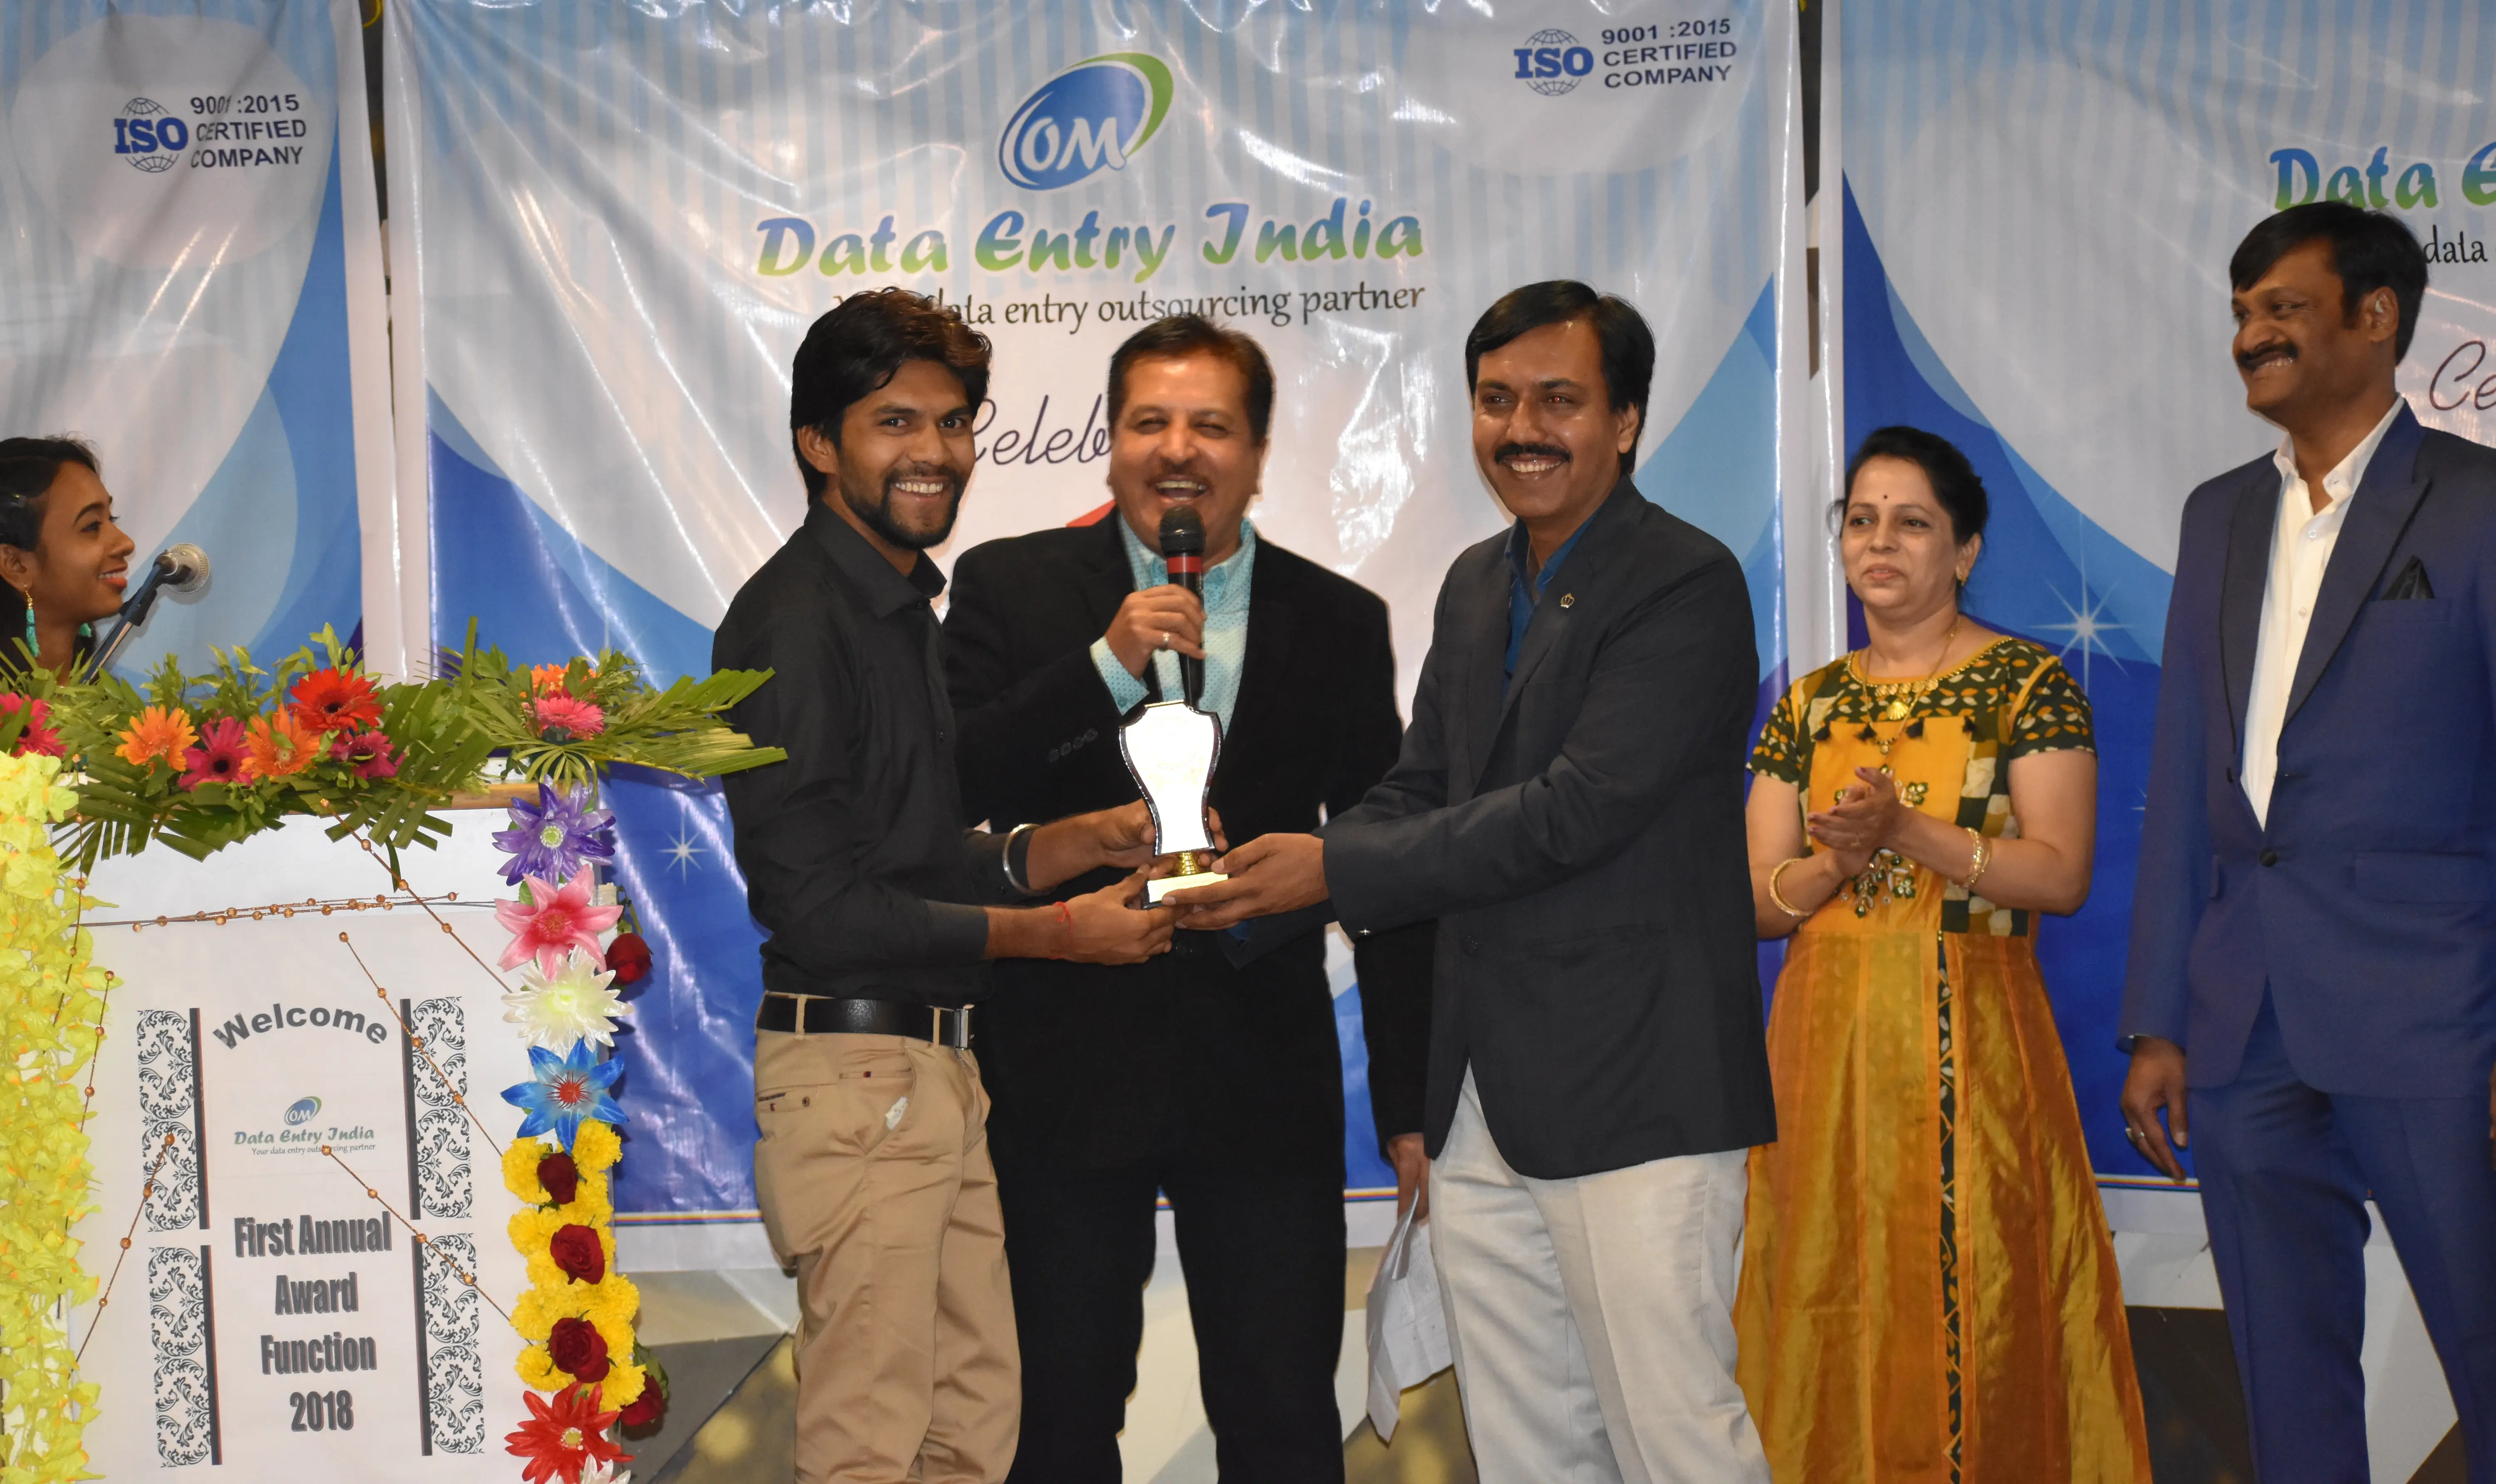 Om Data Entry India Cheerfully Celebrates the Annual Awards Night Promotion